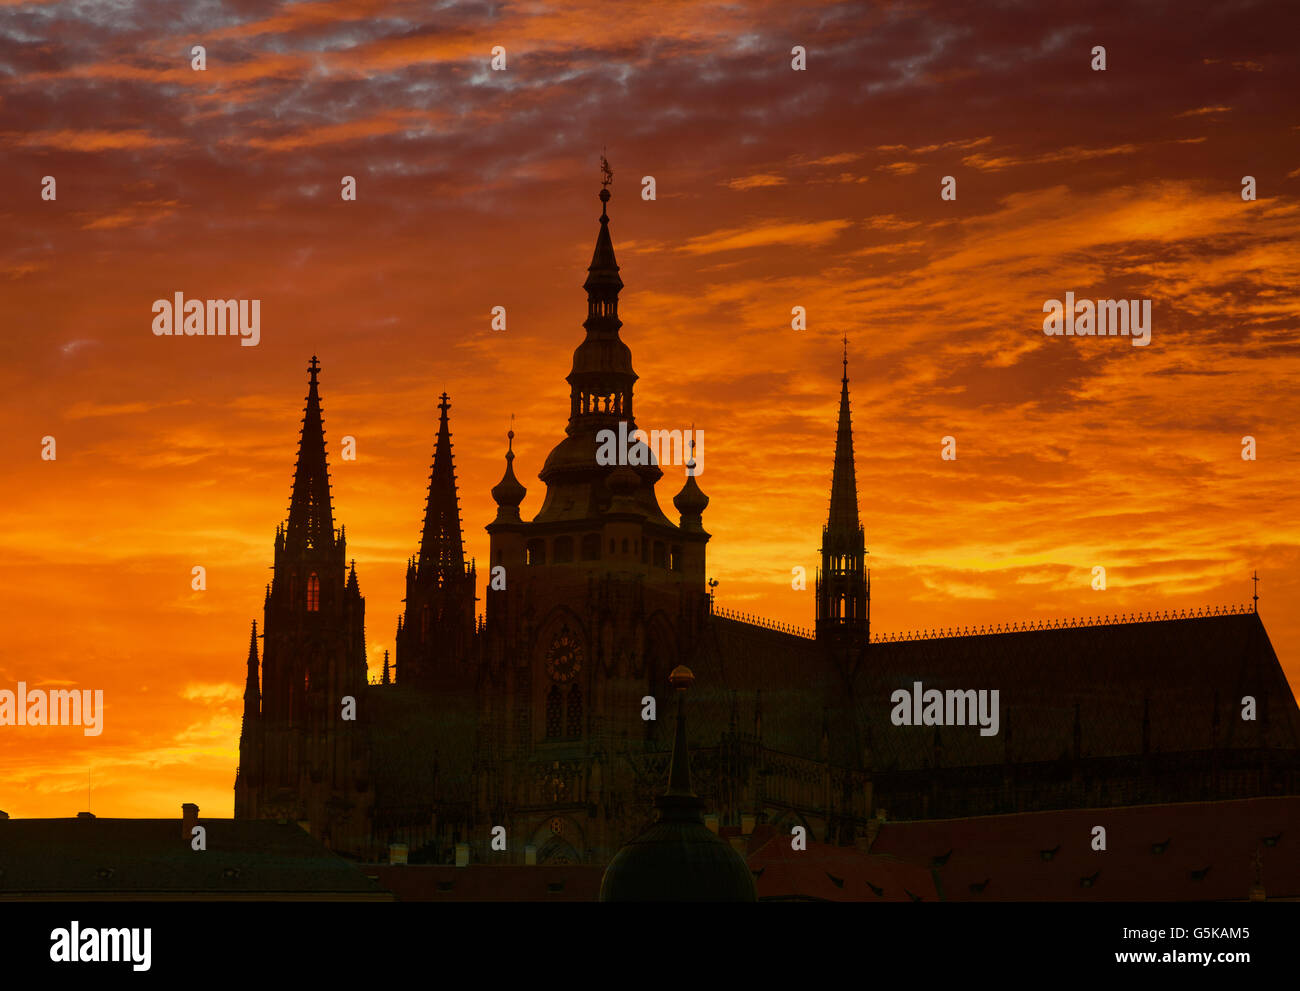 Silhouette of ornate church contre sunset sky Banque D'Images